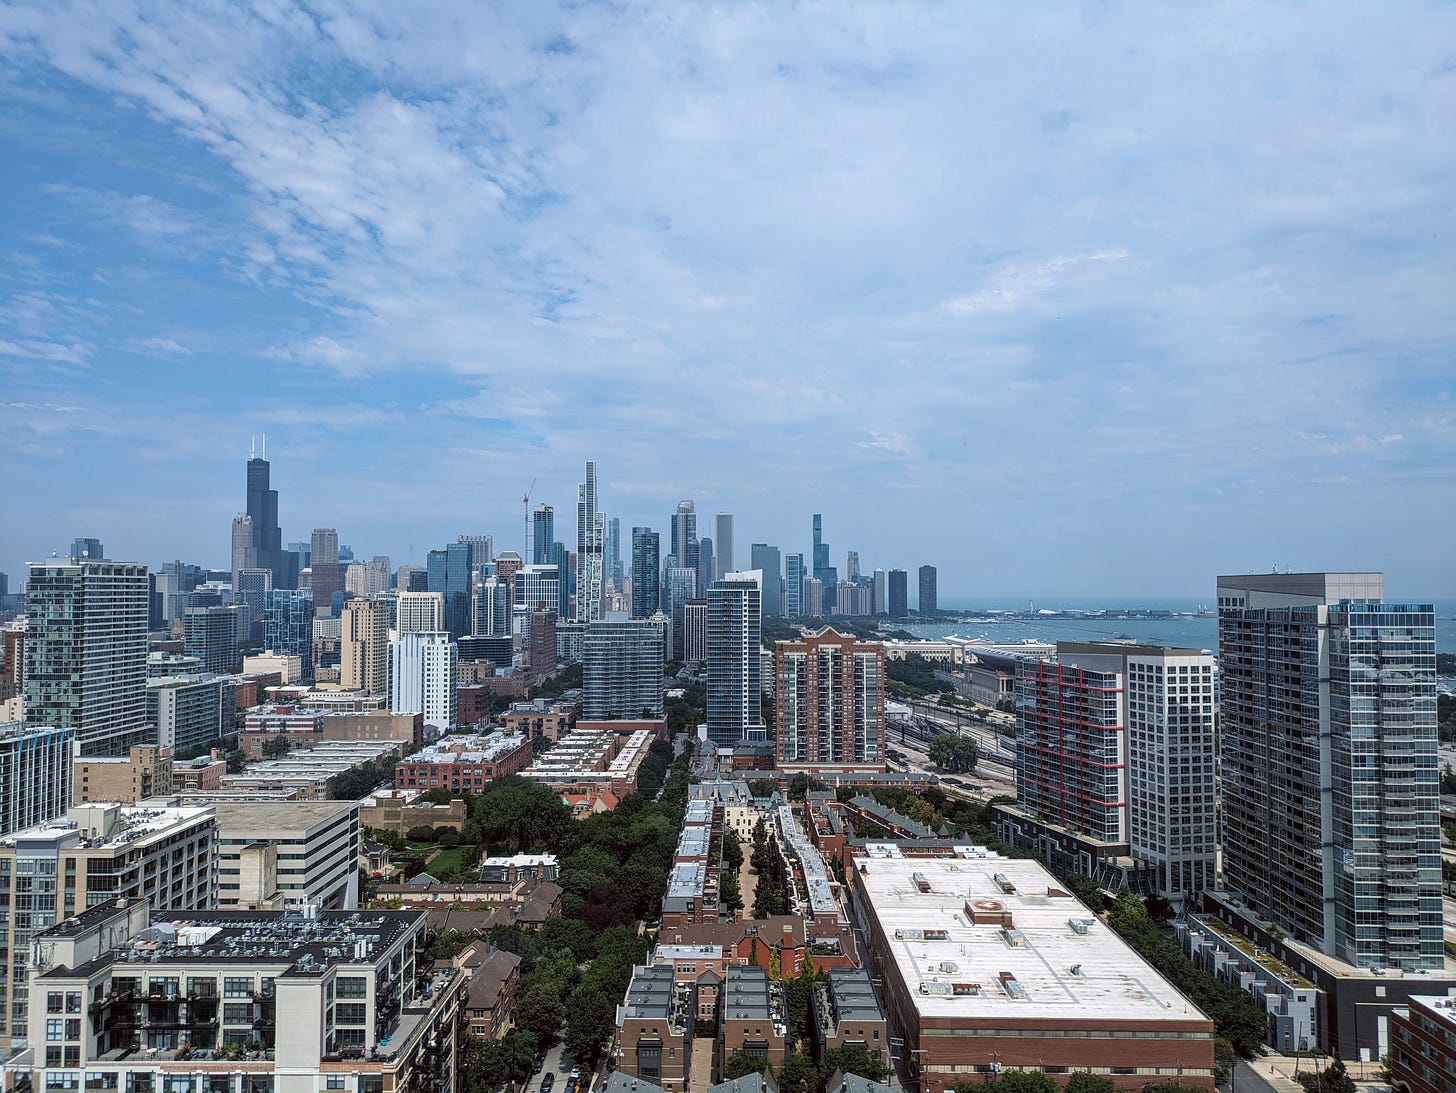 A view of the Chicago skyline from the southside